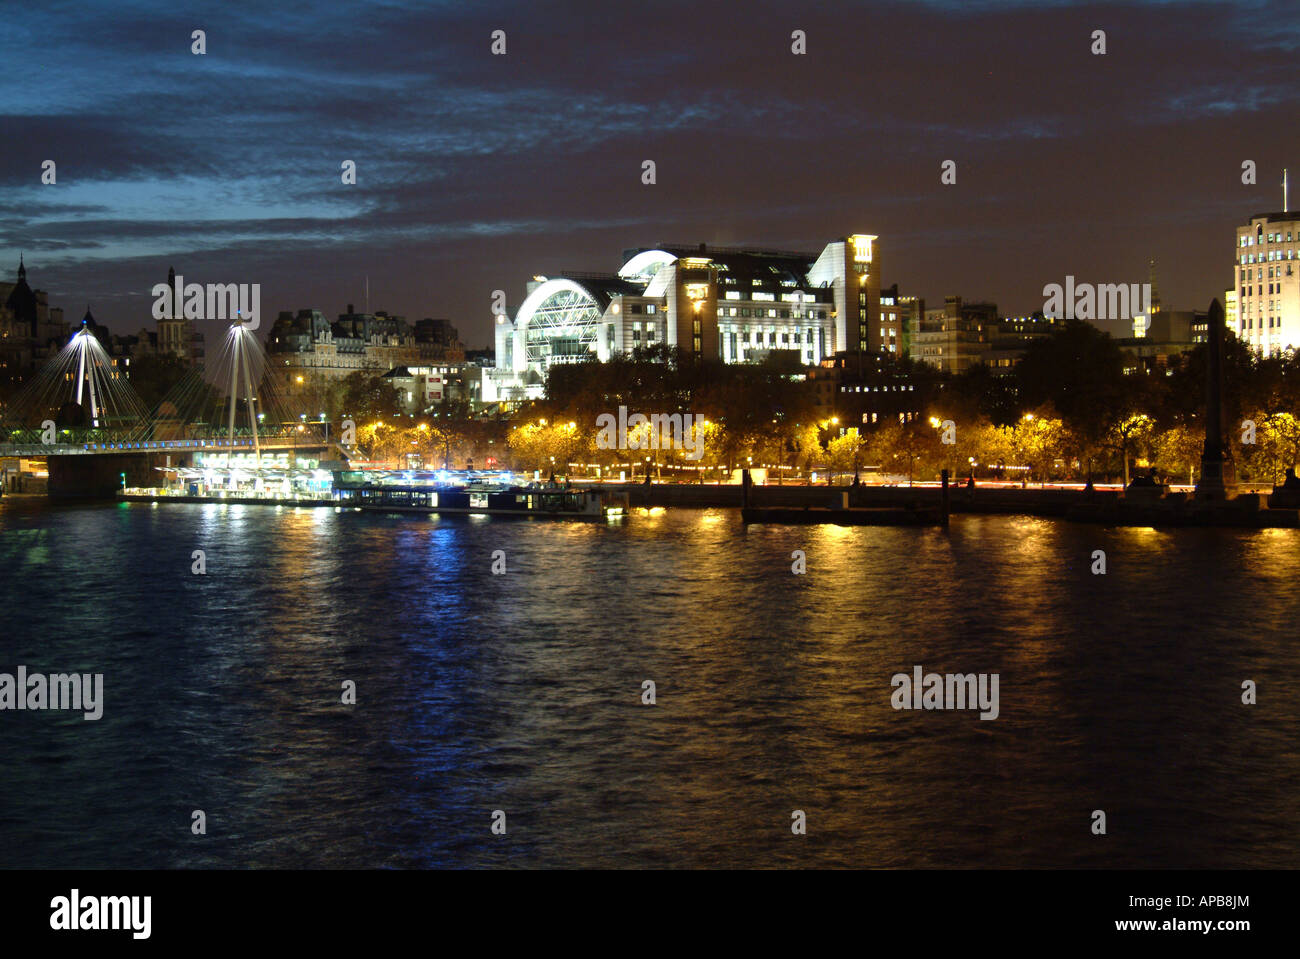 The River Thames at night looking over to Charing Cross train staion and hungerford bridge Stock Photo